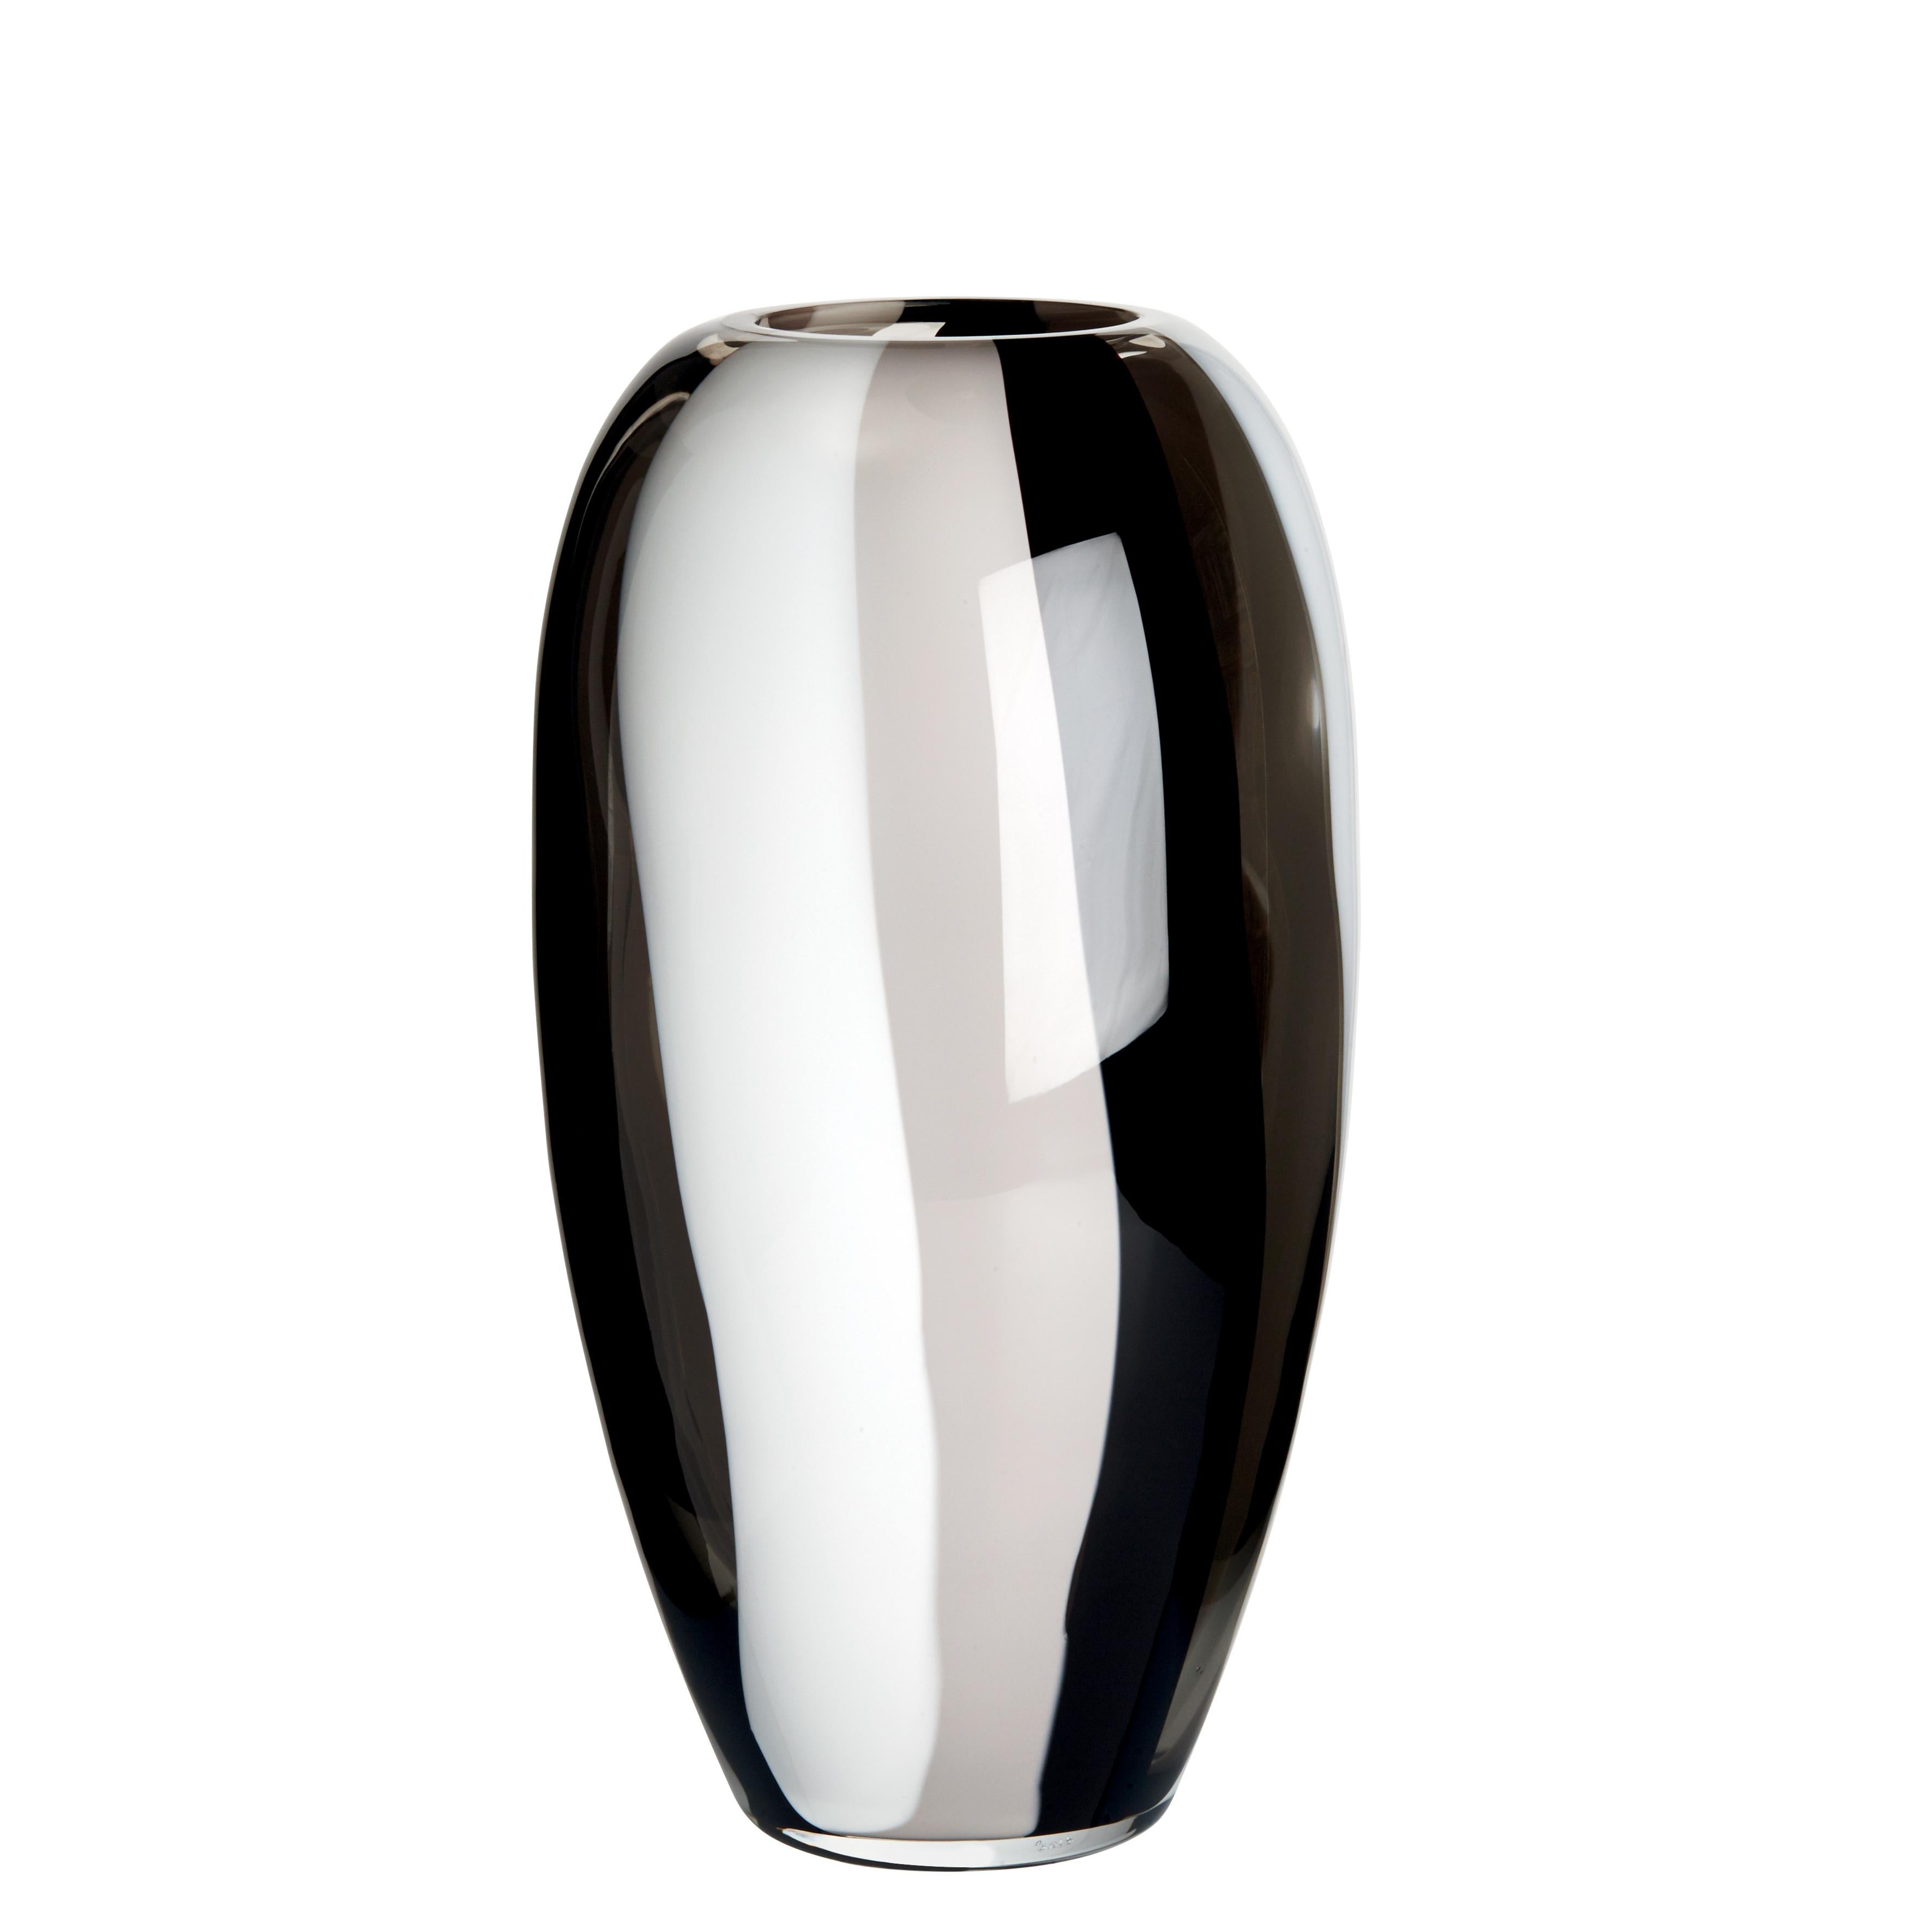 Medium Ogiva Vase in Black, Grey and White by Carlo Moretti For Sale